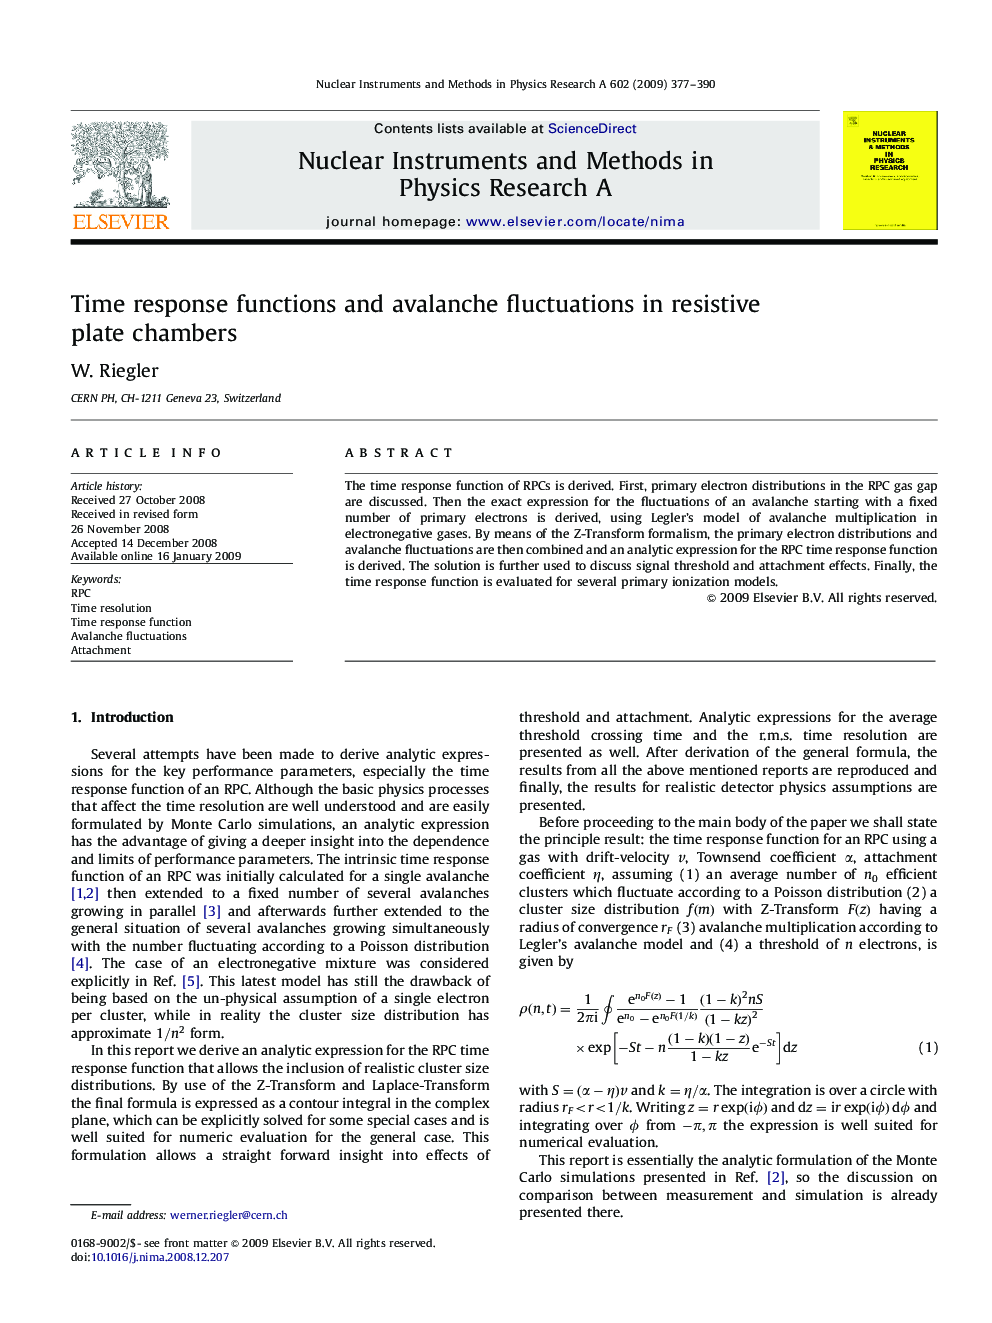 Time response functions and avalanche fluctuations in resistive plate chambers